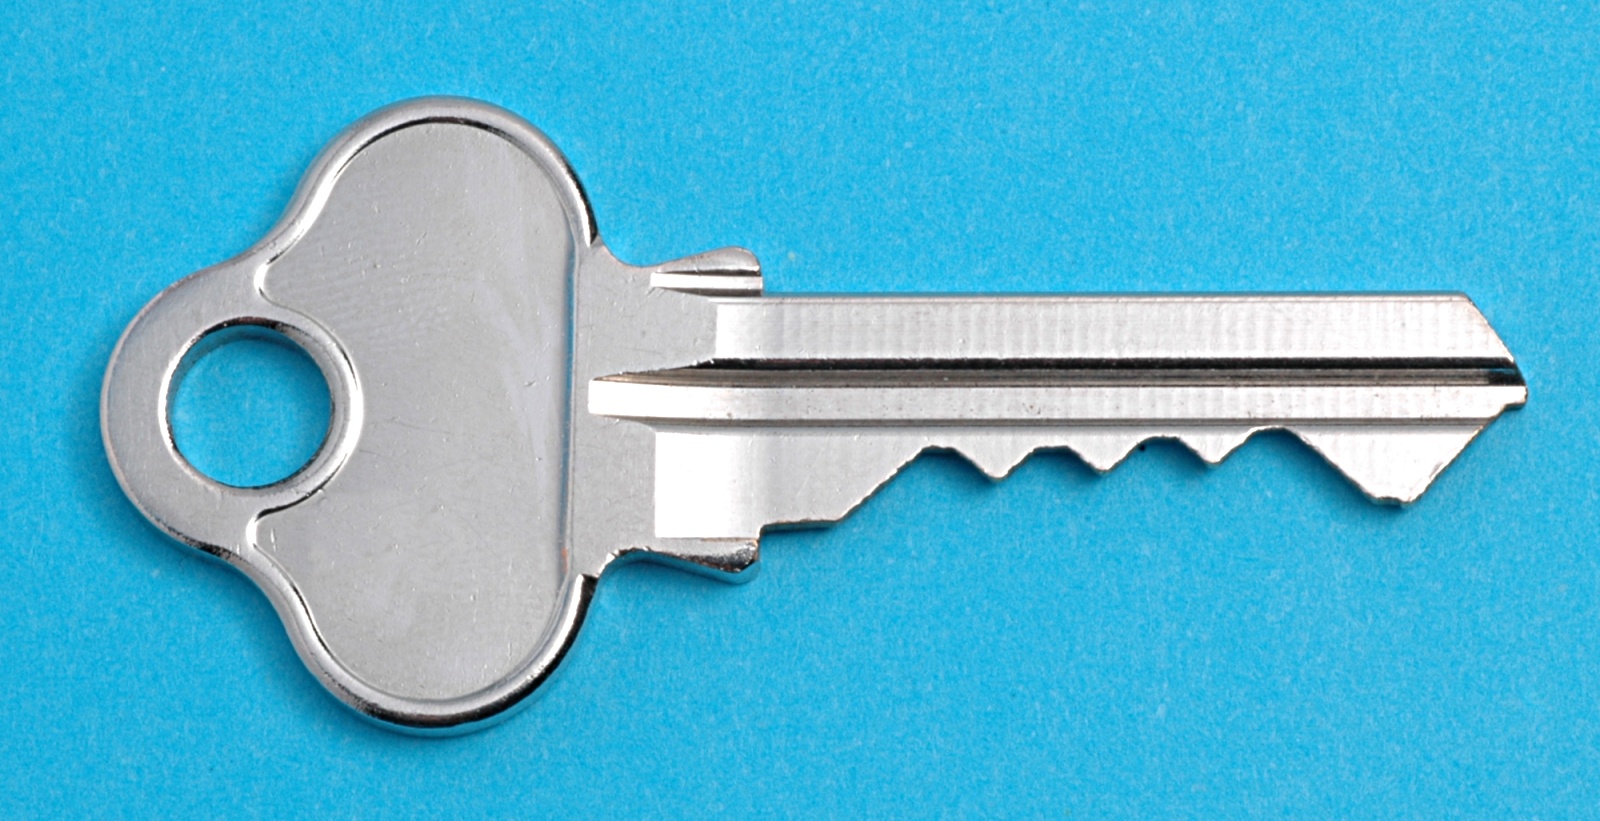 First time home buyer Silver key on blue background